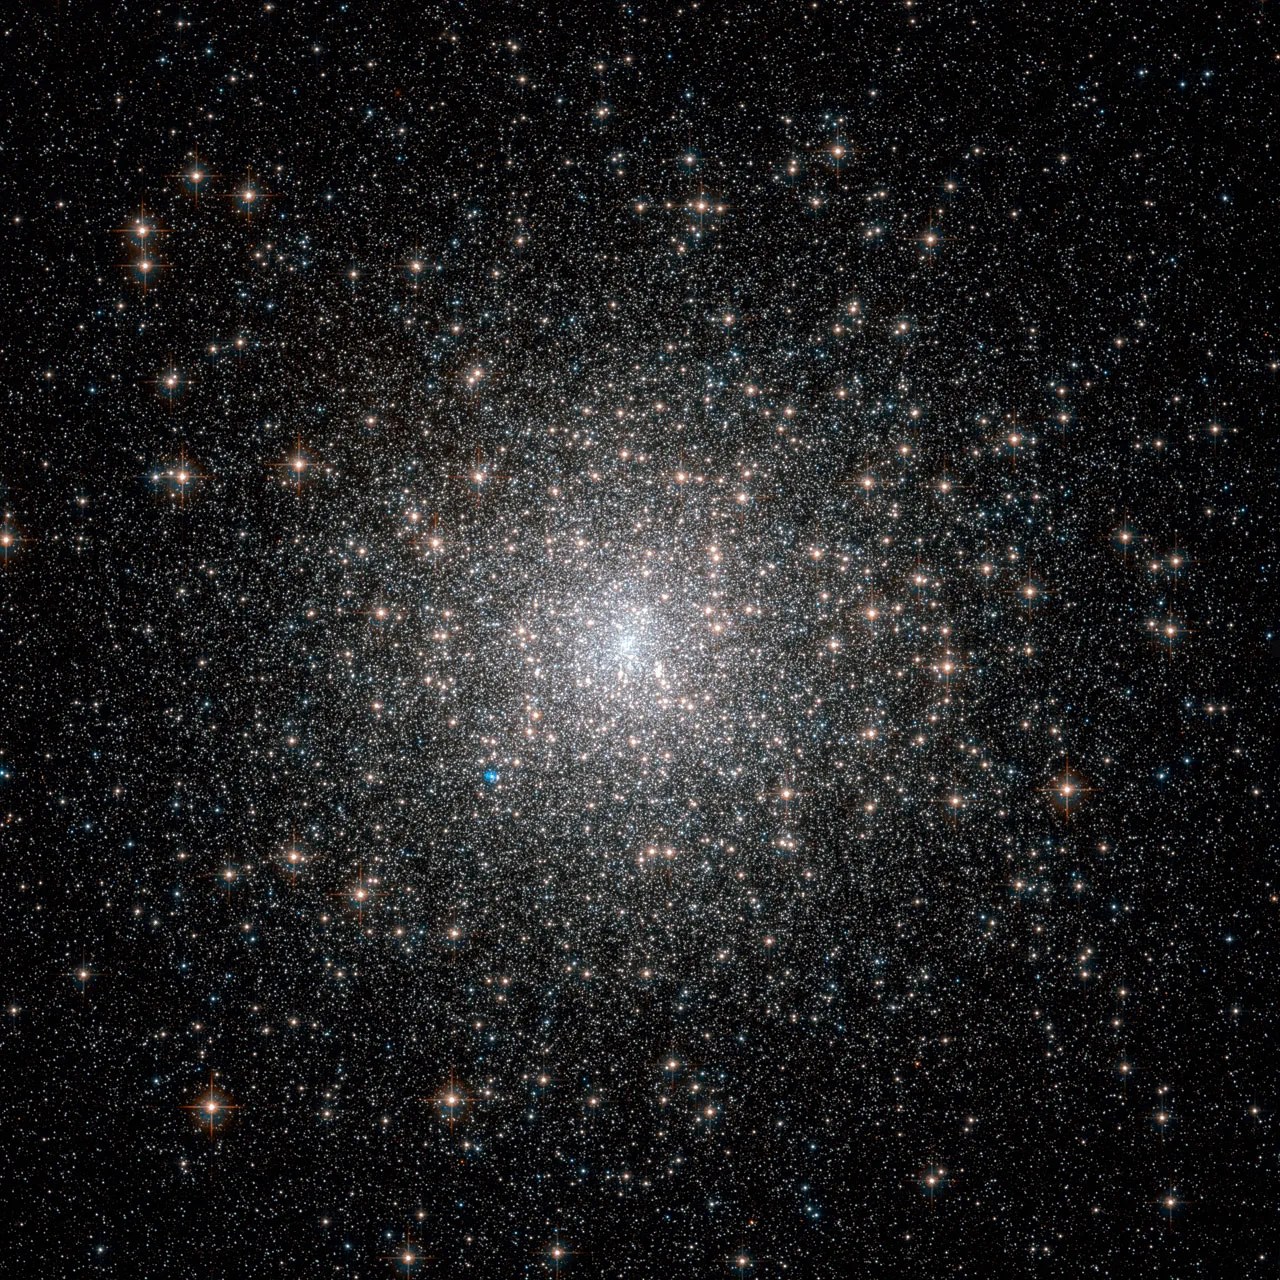 Hubble view of M15